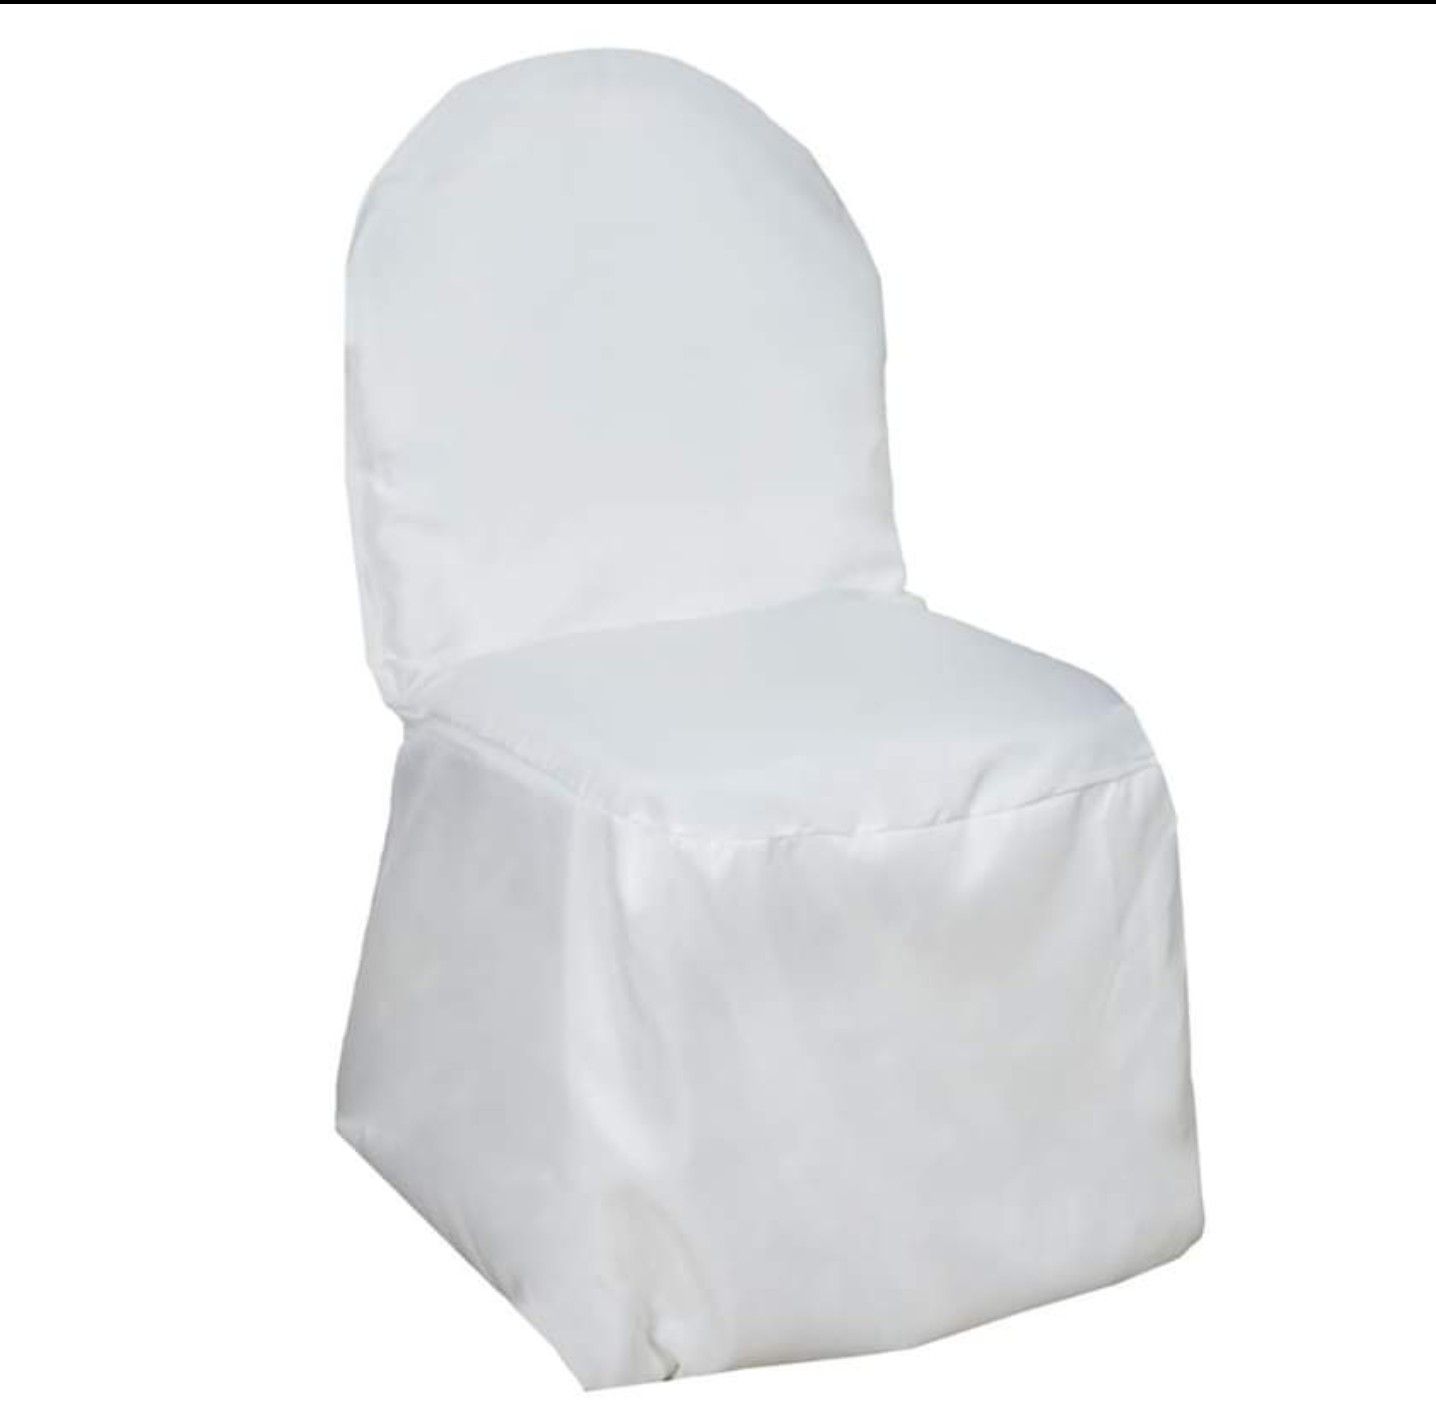 150 white chair covers